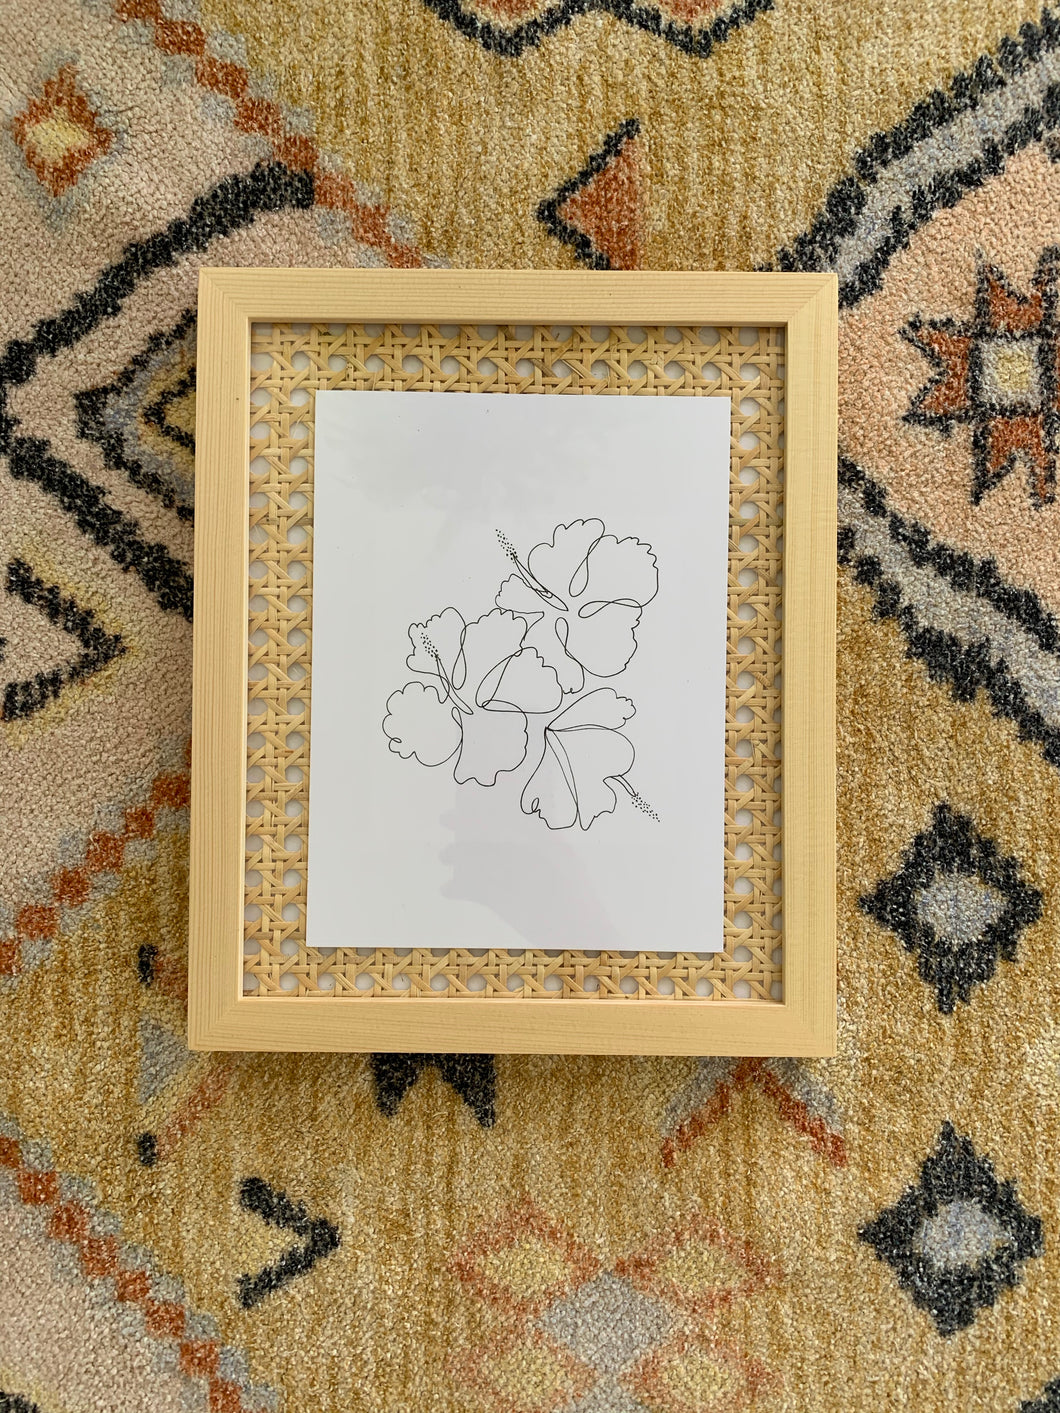 Line hibiscus art print with cane background frame.